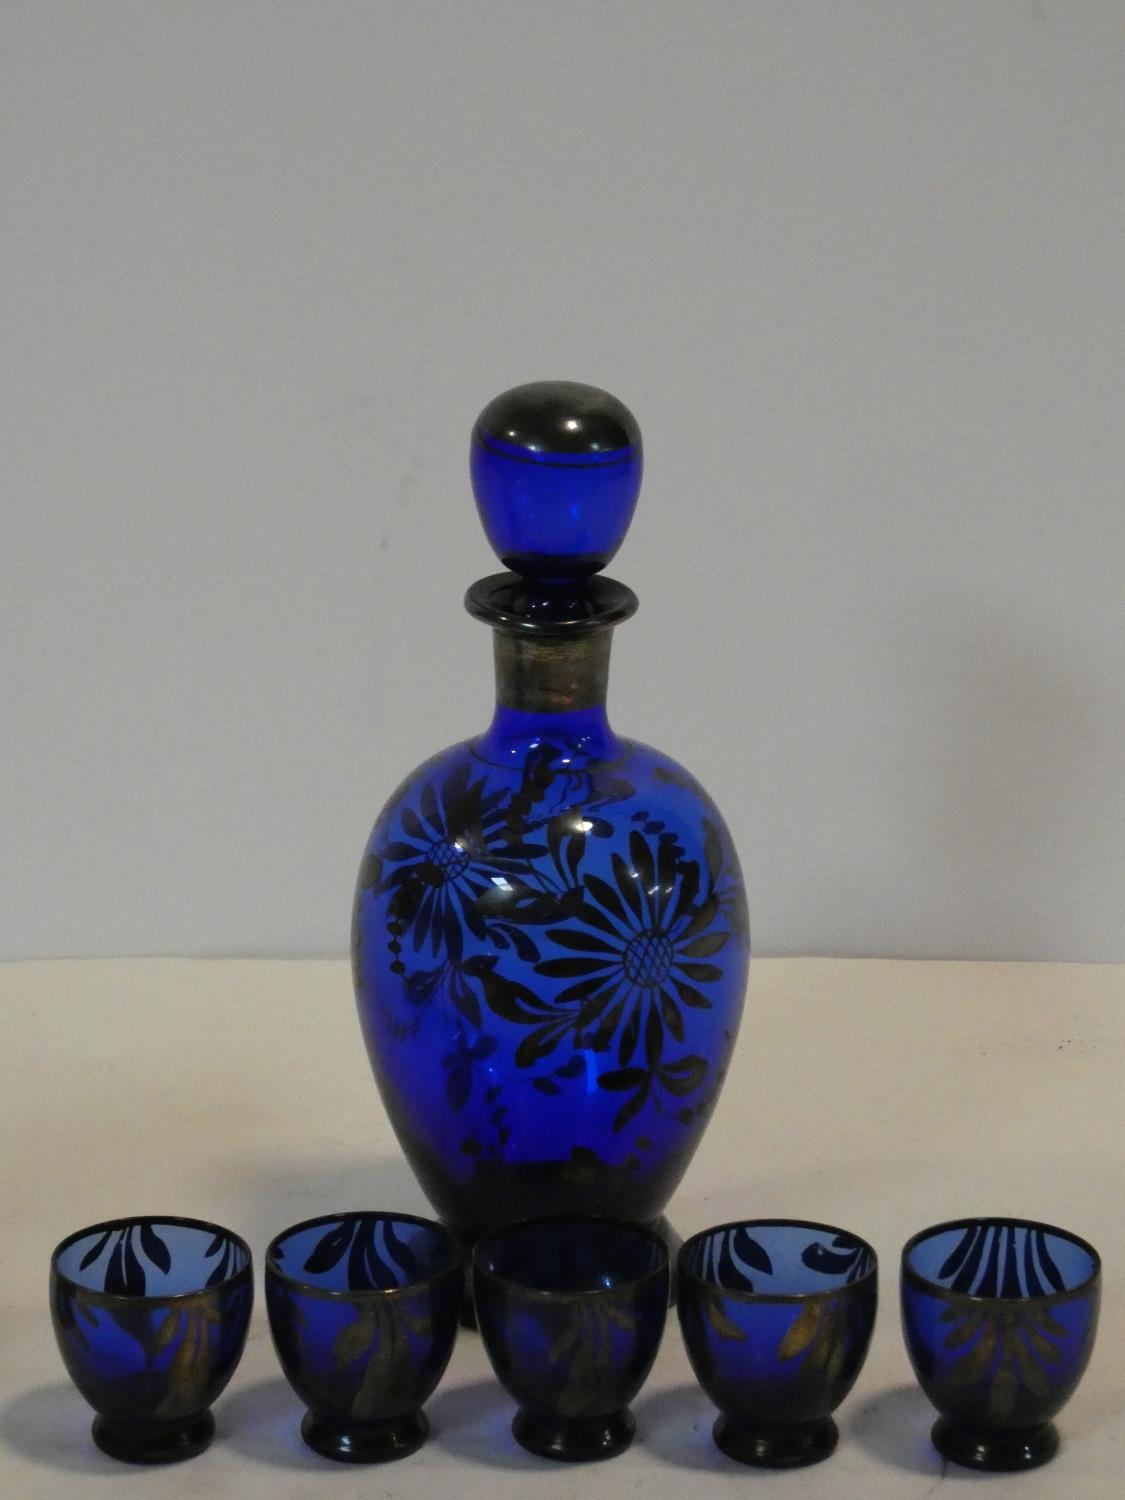 A cobalt blue glass decanter and shot glasses with painted silver floral design along with a - Image 2 of 3